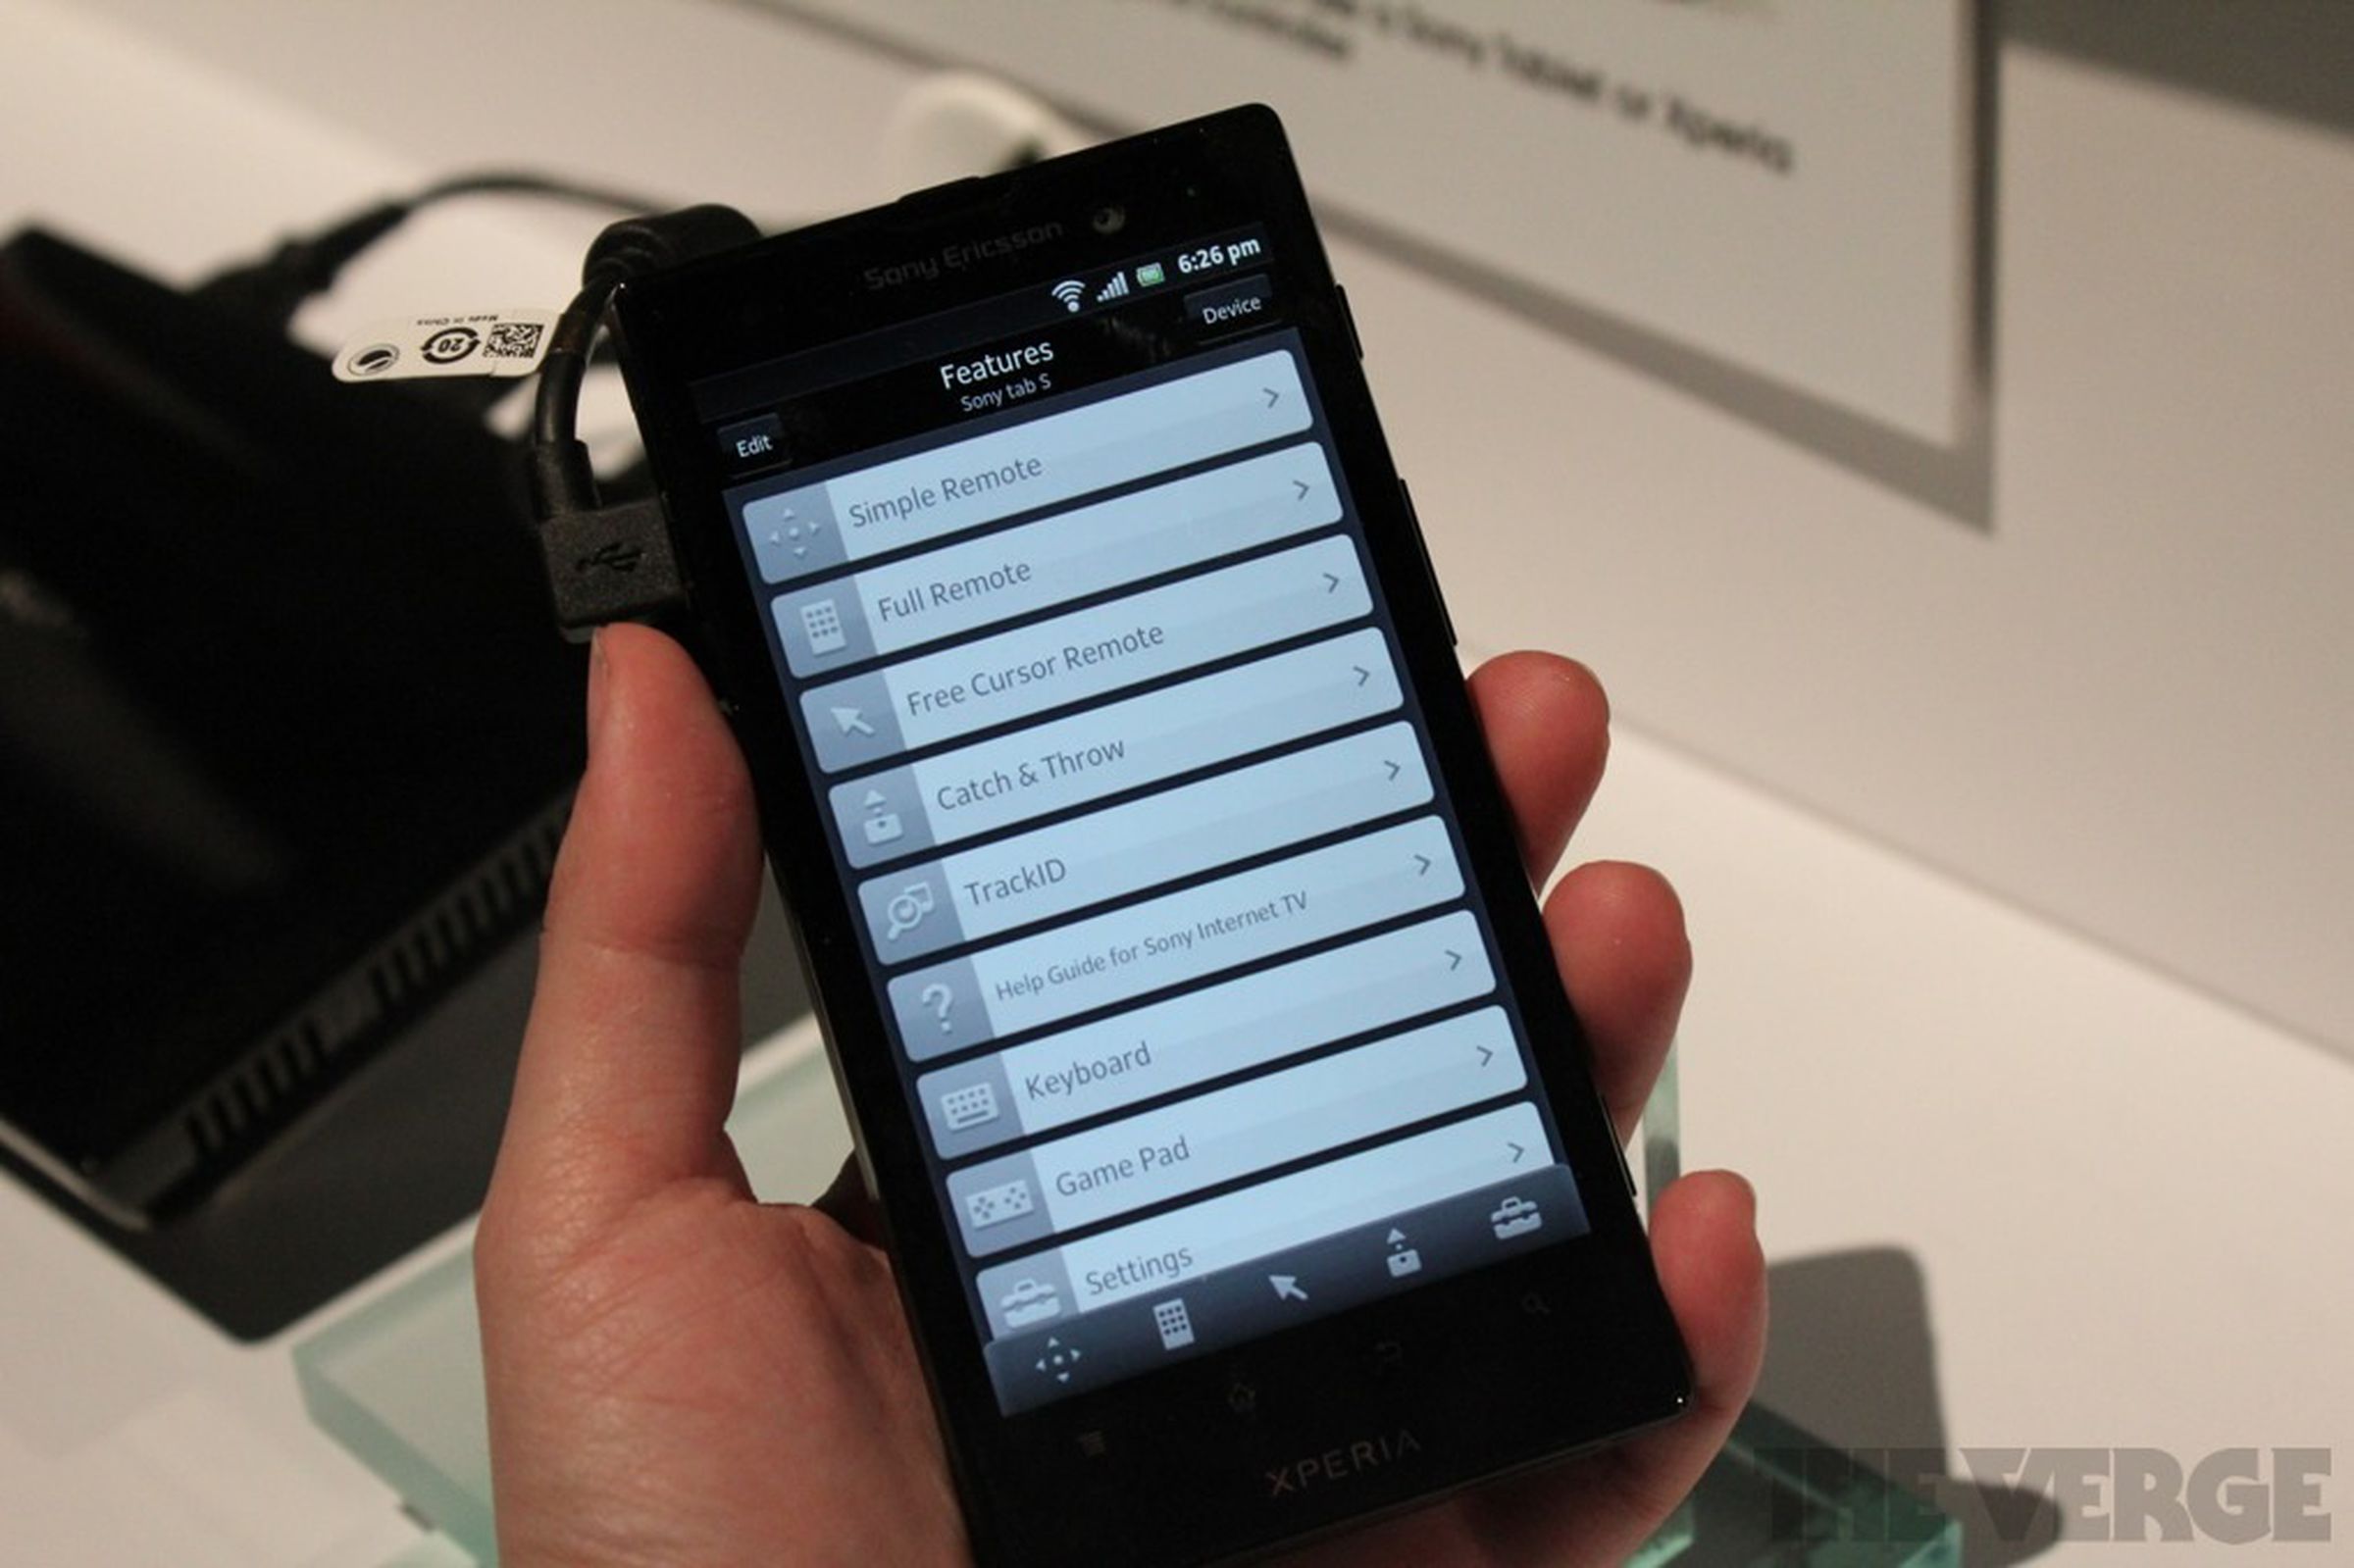 Sony Media Remote Android app hands-on